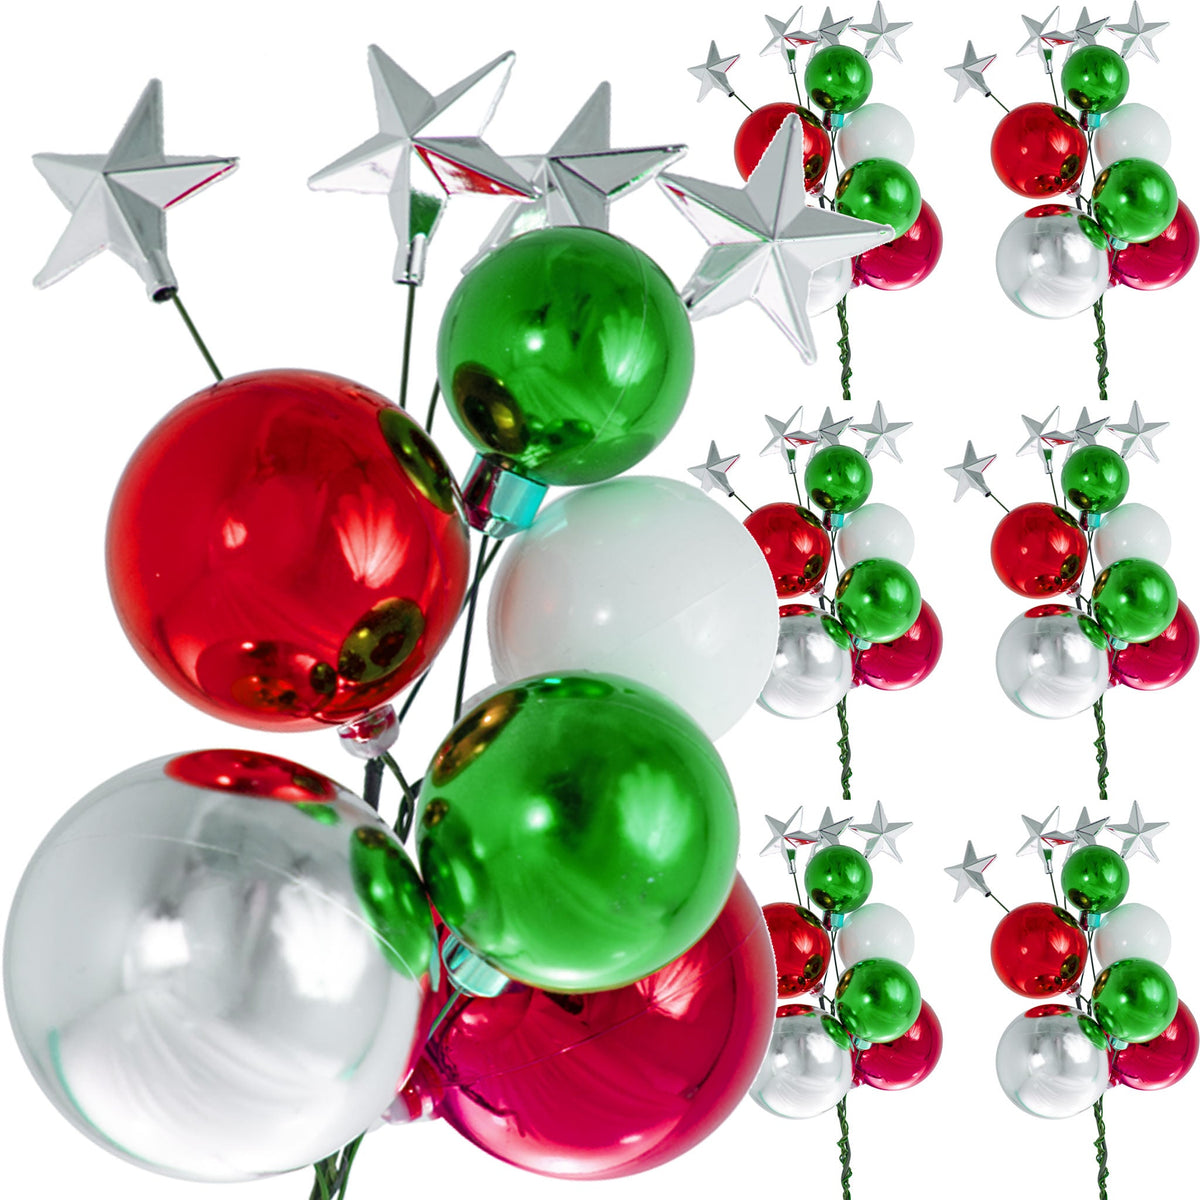 The Hayward Christmas Ball Clusters with Shiny Red, Green, and Silver Ornaments are sold in sets of 6 from Lee Display